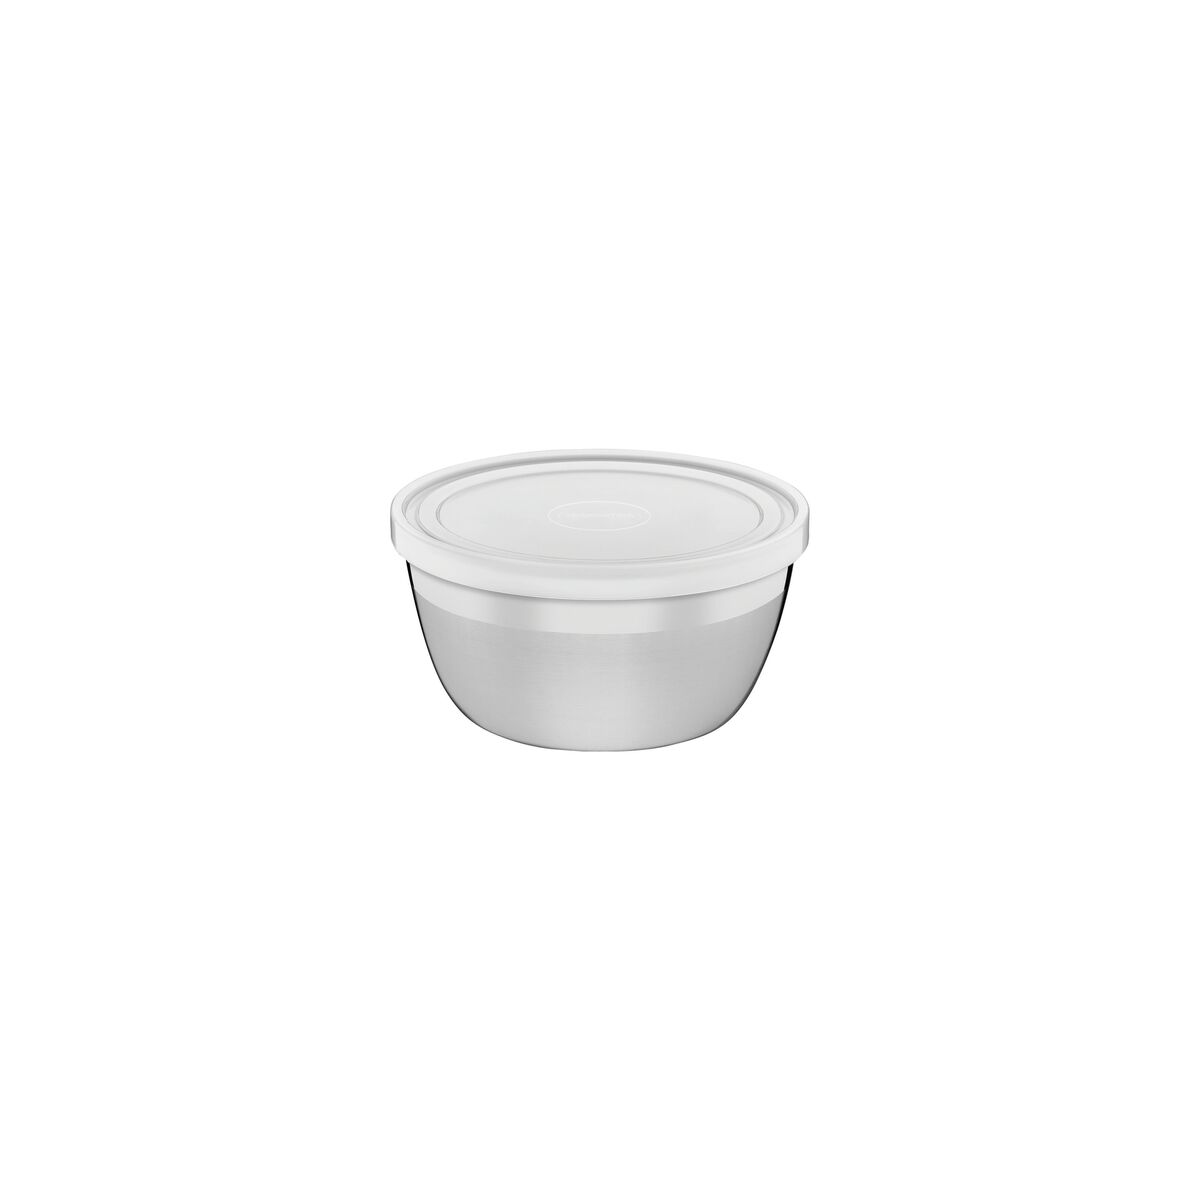 Tramontina Freezinox round stainless steel container with plastic lid, 0.3 L and 9 cm